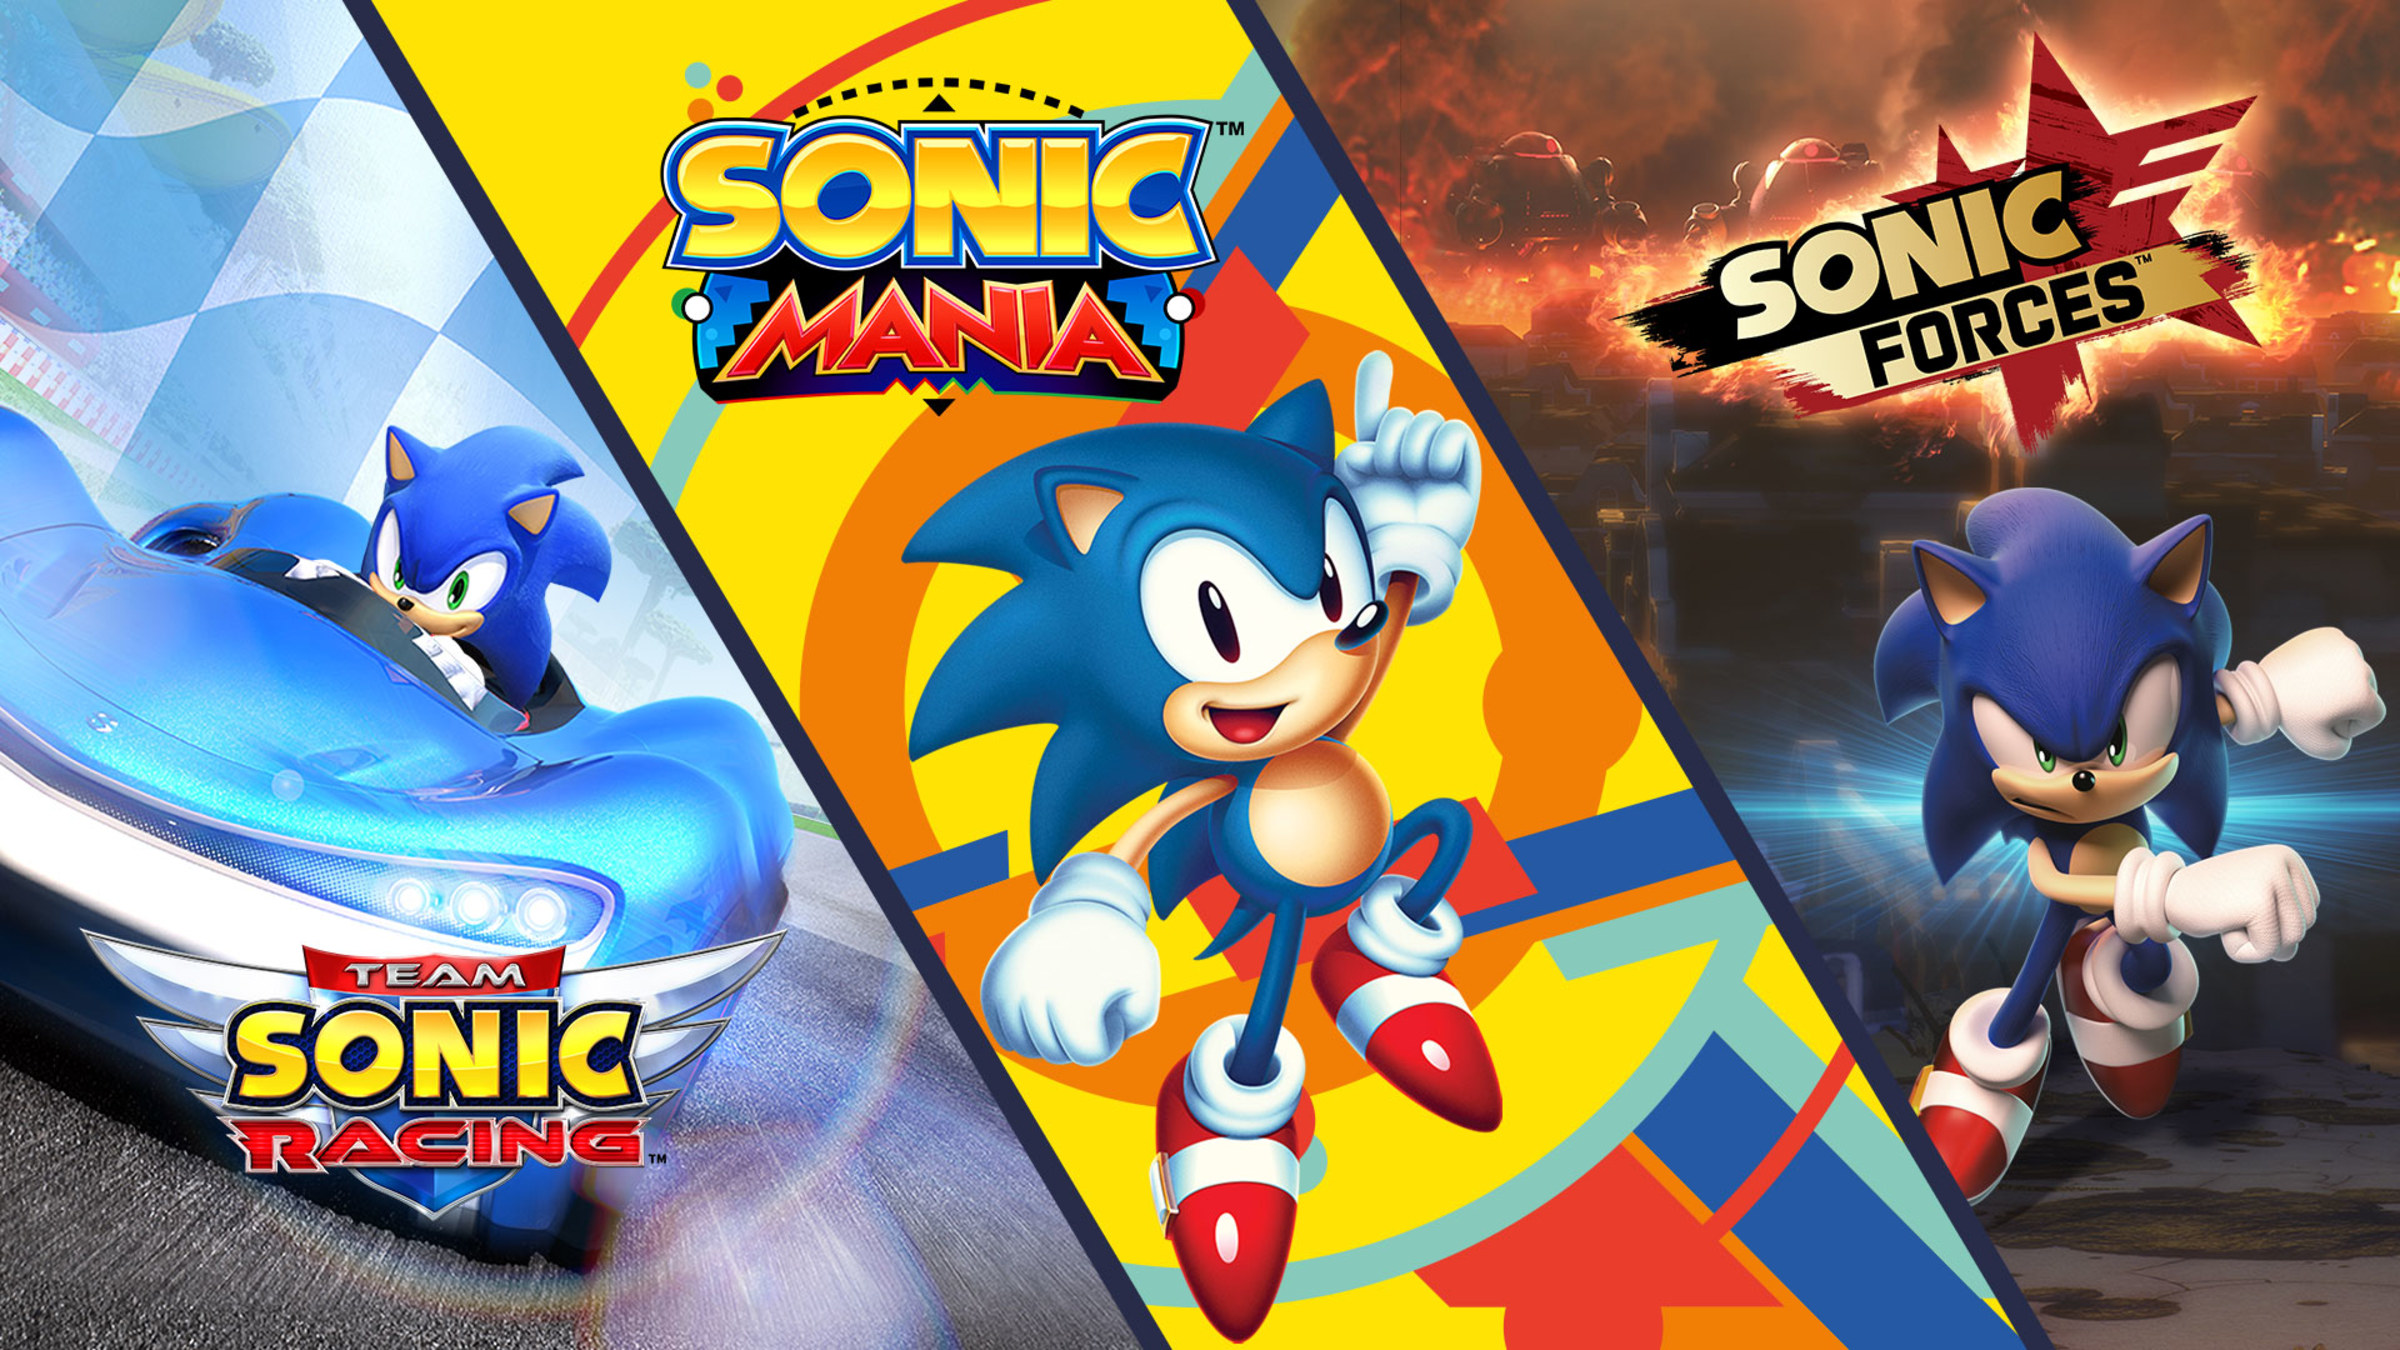 Jogo PS4 Sonic Mania Plus & Sonic Forces Double Pack